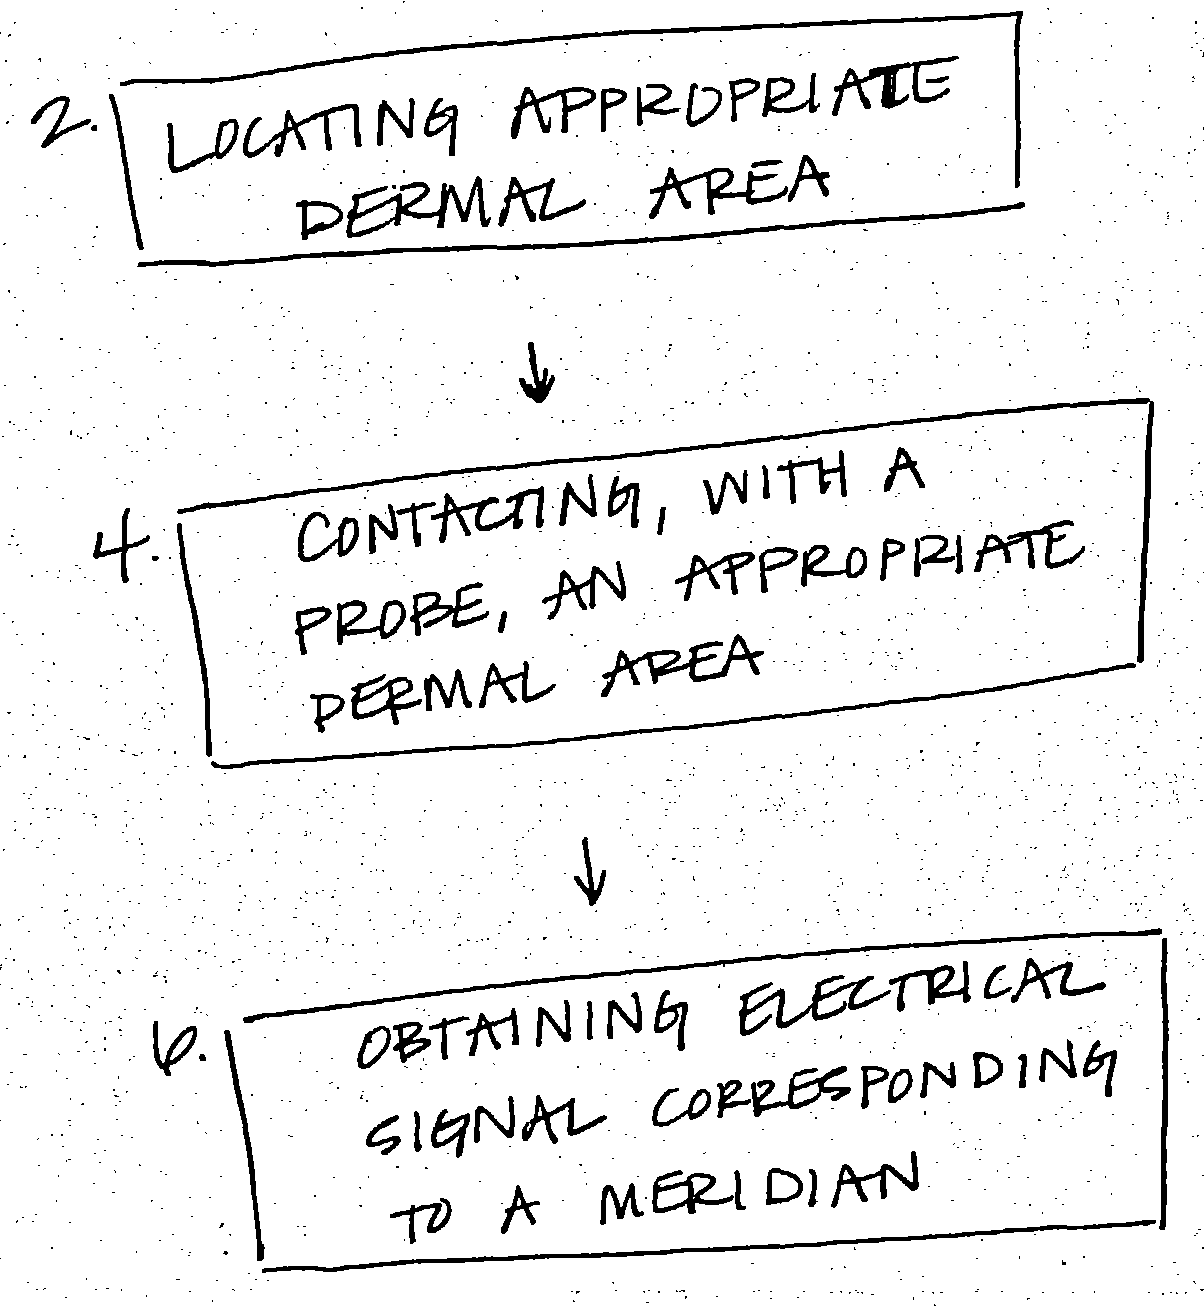 Methods for obtaining quick and repeatable electrical signals in living organisms